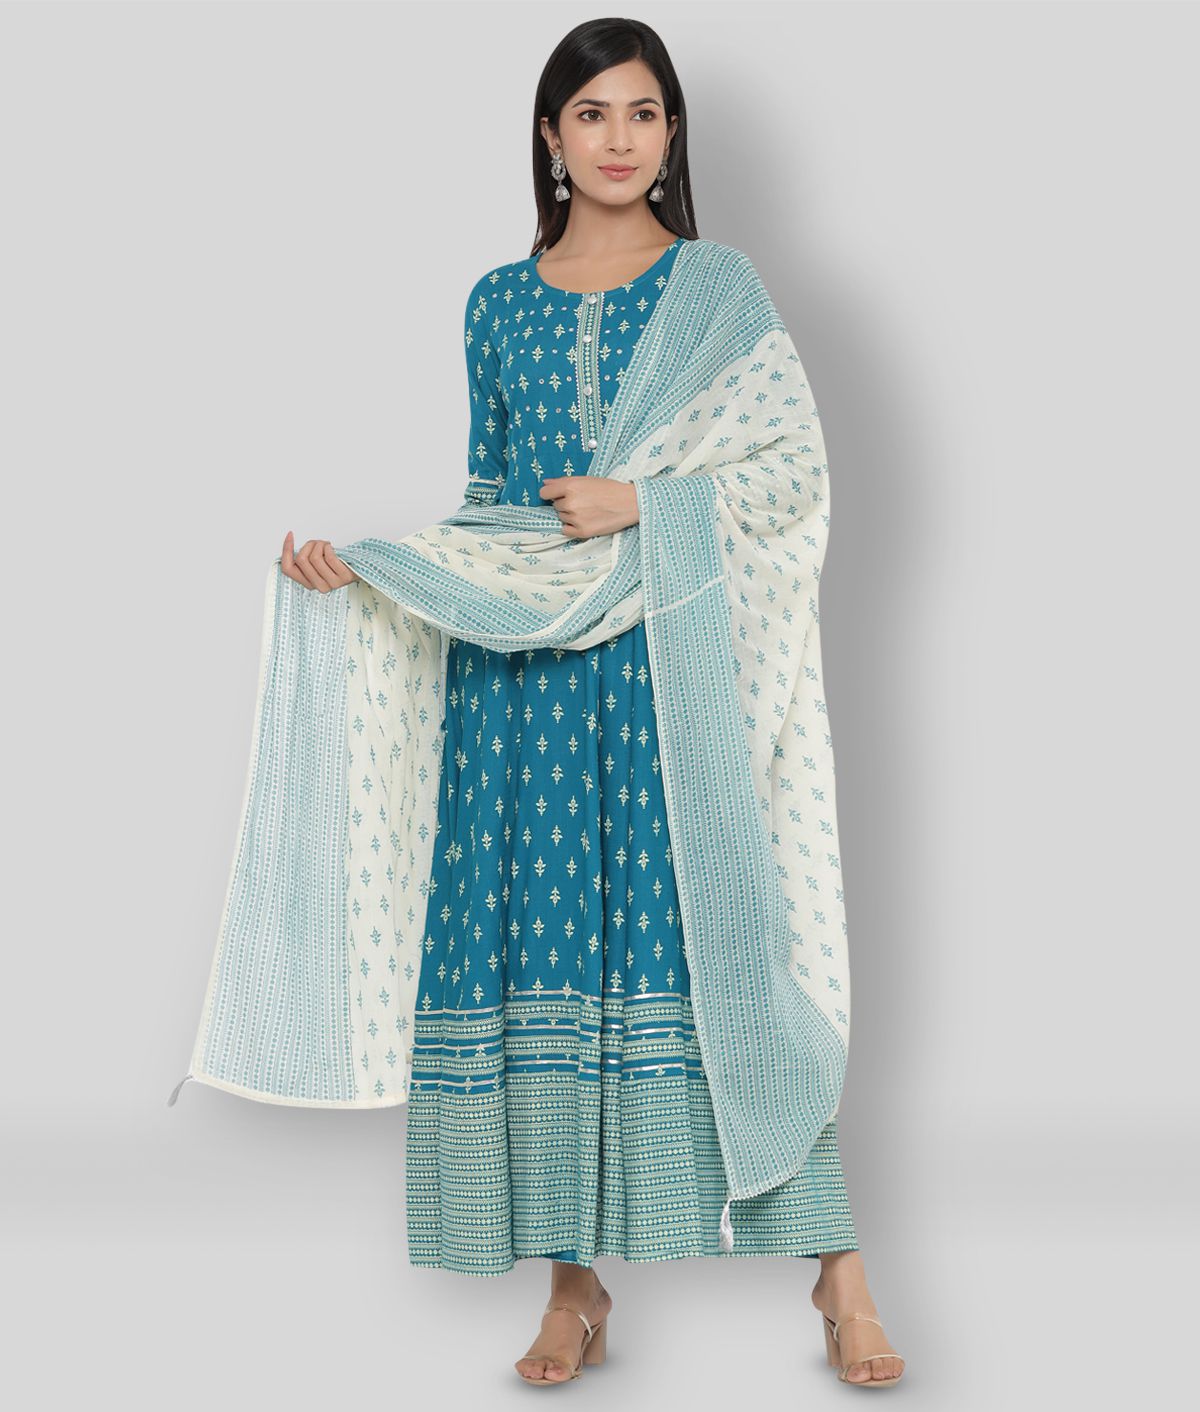     			KIPEK - Blue Straight Rayon Women's Stitched Salwar Suit ( Pack of 1 )